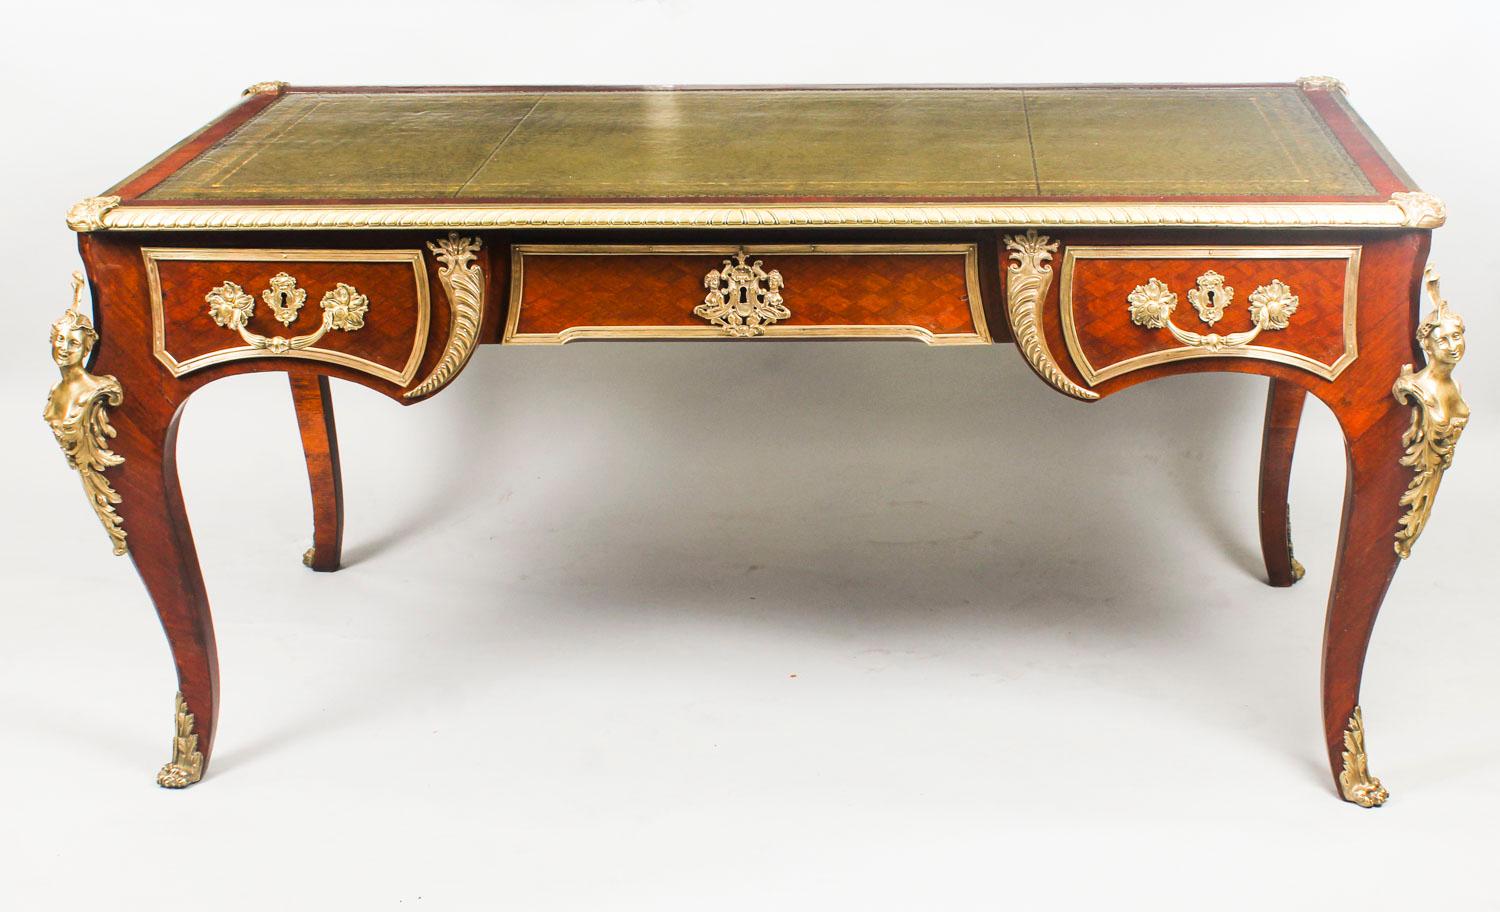 This is a gorgeous antique French Louis XV Revival mahogany bureau plat with highly decorative ormolu mounts, circa 1880 in date.

The rectangular top with a decorative gilt bronze border, raised corner cartouches and an inset gold tooled green